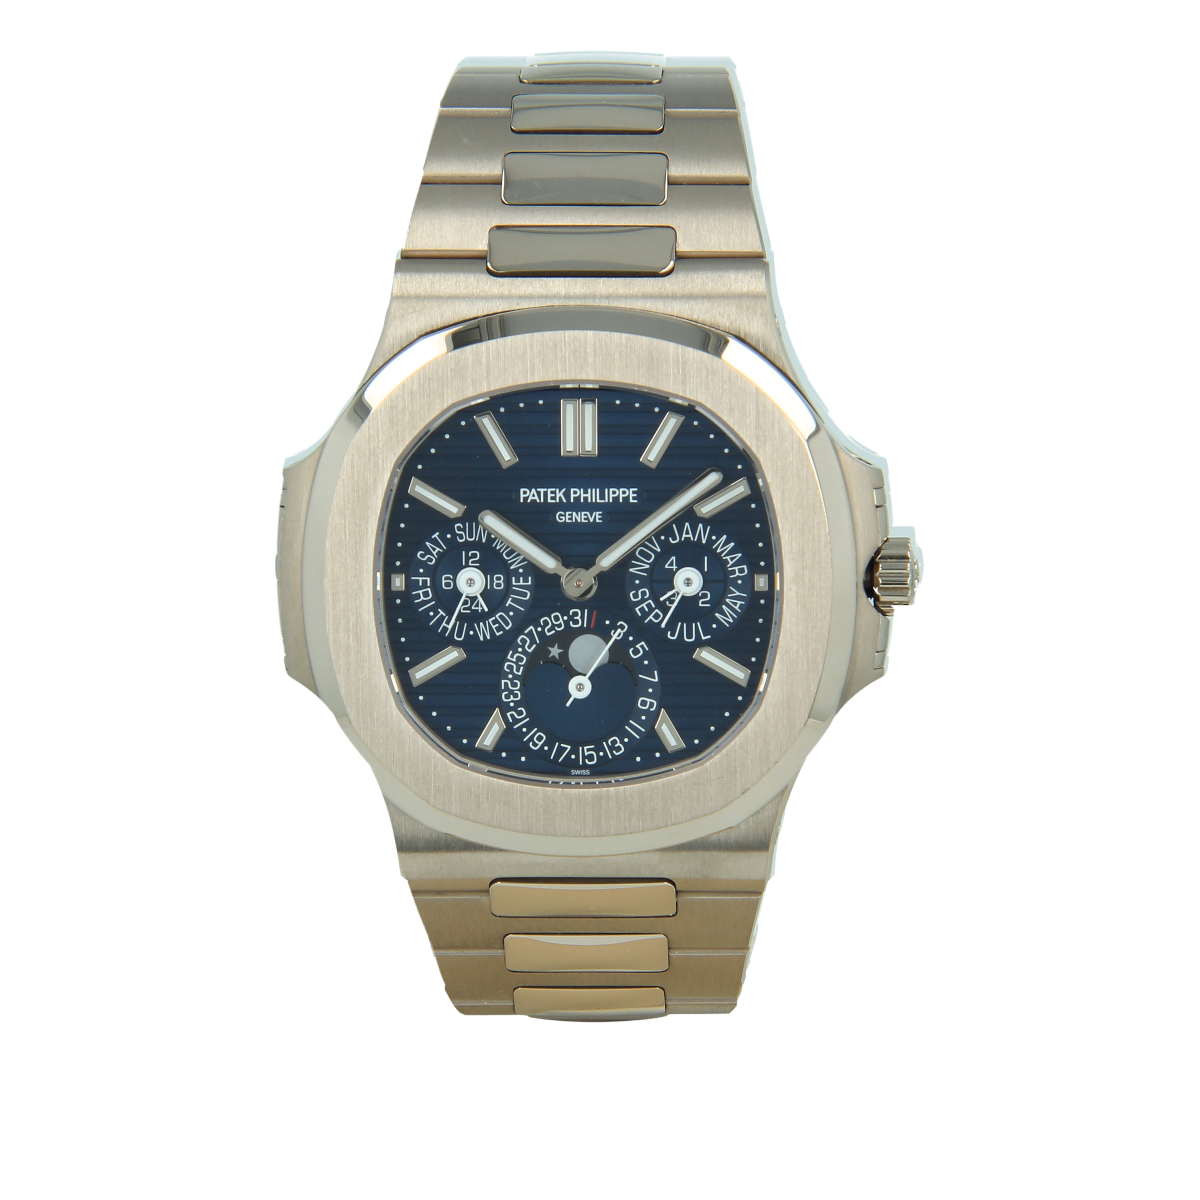 Patek Philippe Nautilus 5990/1A Travel Time Chronograph *Brand-New* | Buy pre-owned Patek Philippe watch